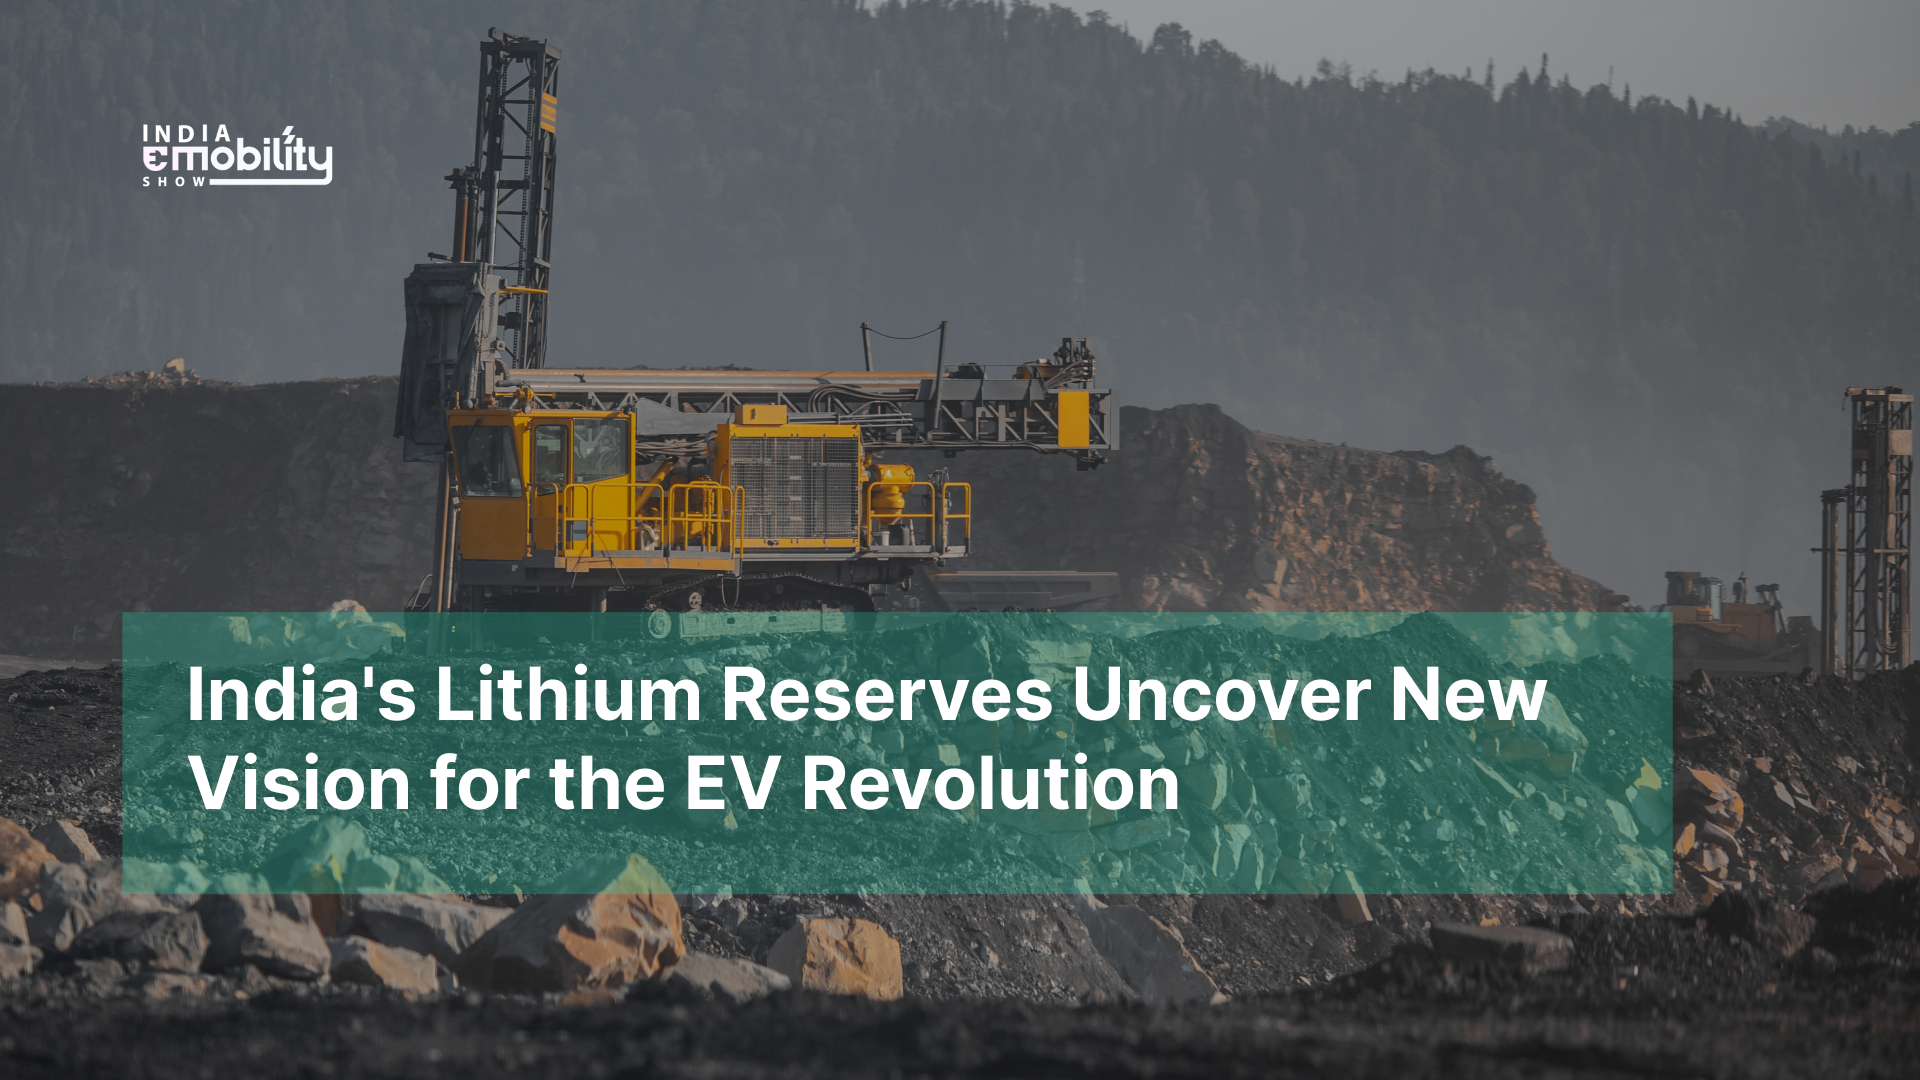 India's Lithium Reserves Uncover New Vision for the EV Revolution